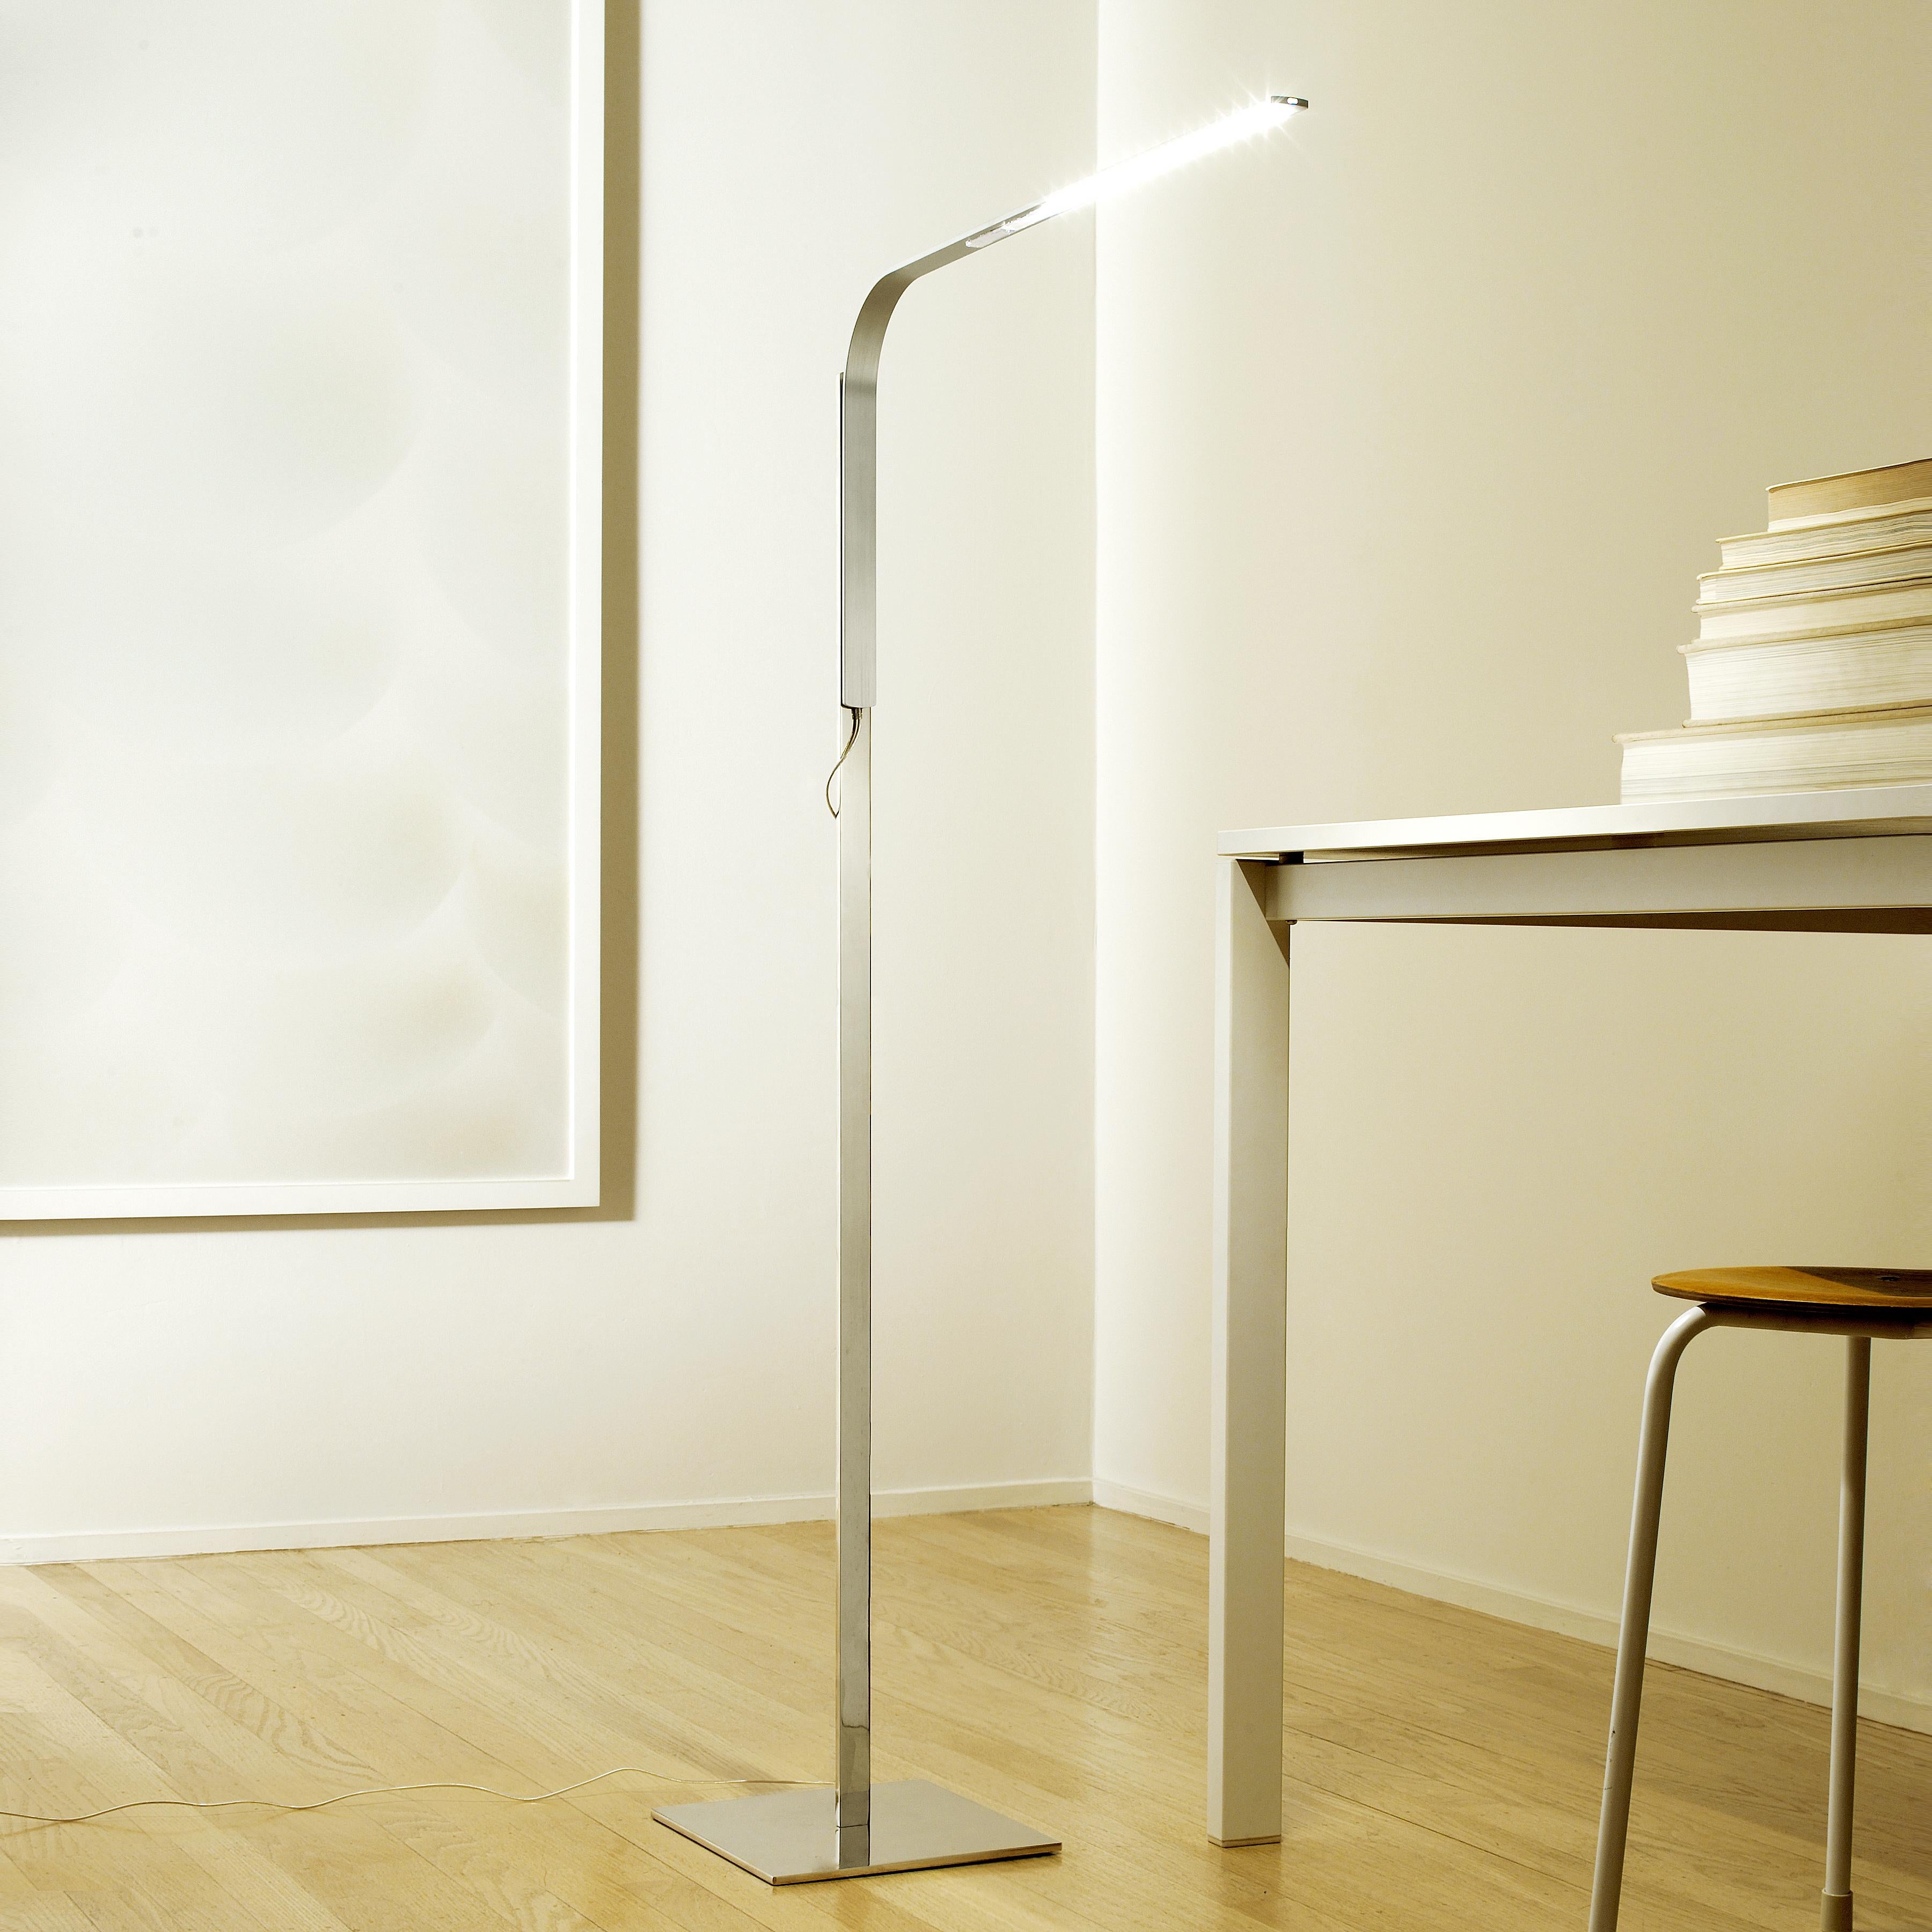 Lim is a revolutionary ultra-slim LED task light that is as fun to use as it is functional. Lim’s “L” shaped arm discreetly conceals an array of high-output LEDs and utilizes a magnetic attachment system for effortless